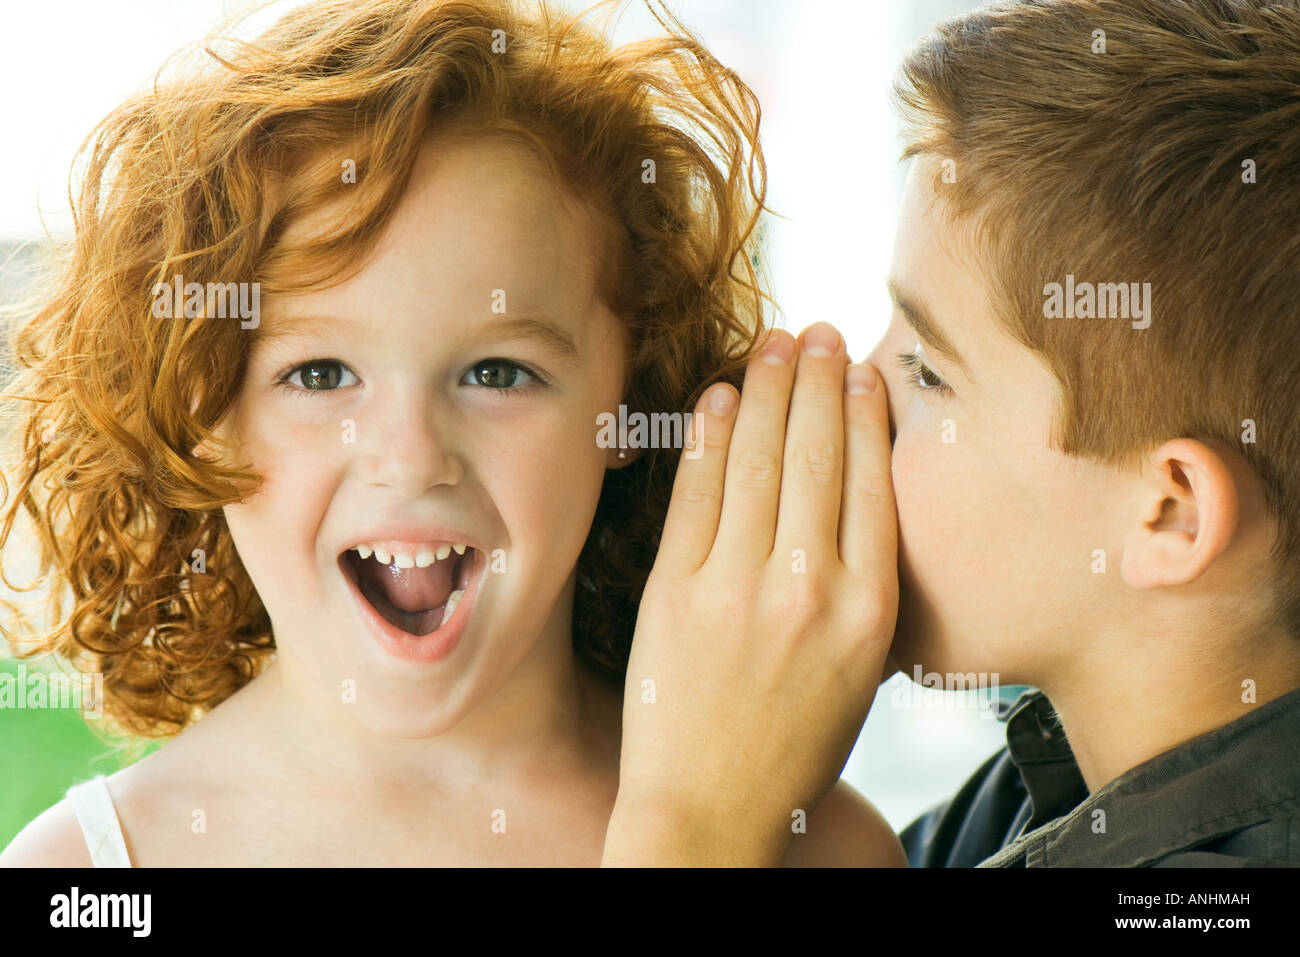 Boy whispering in girl's ear, close-up Stock Photo